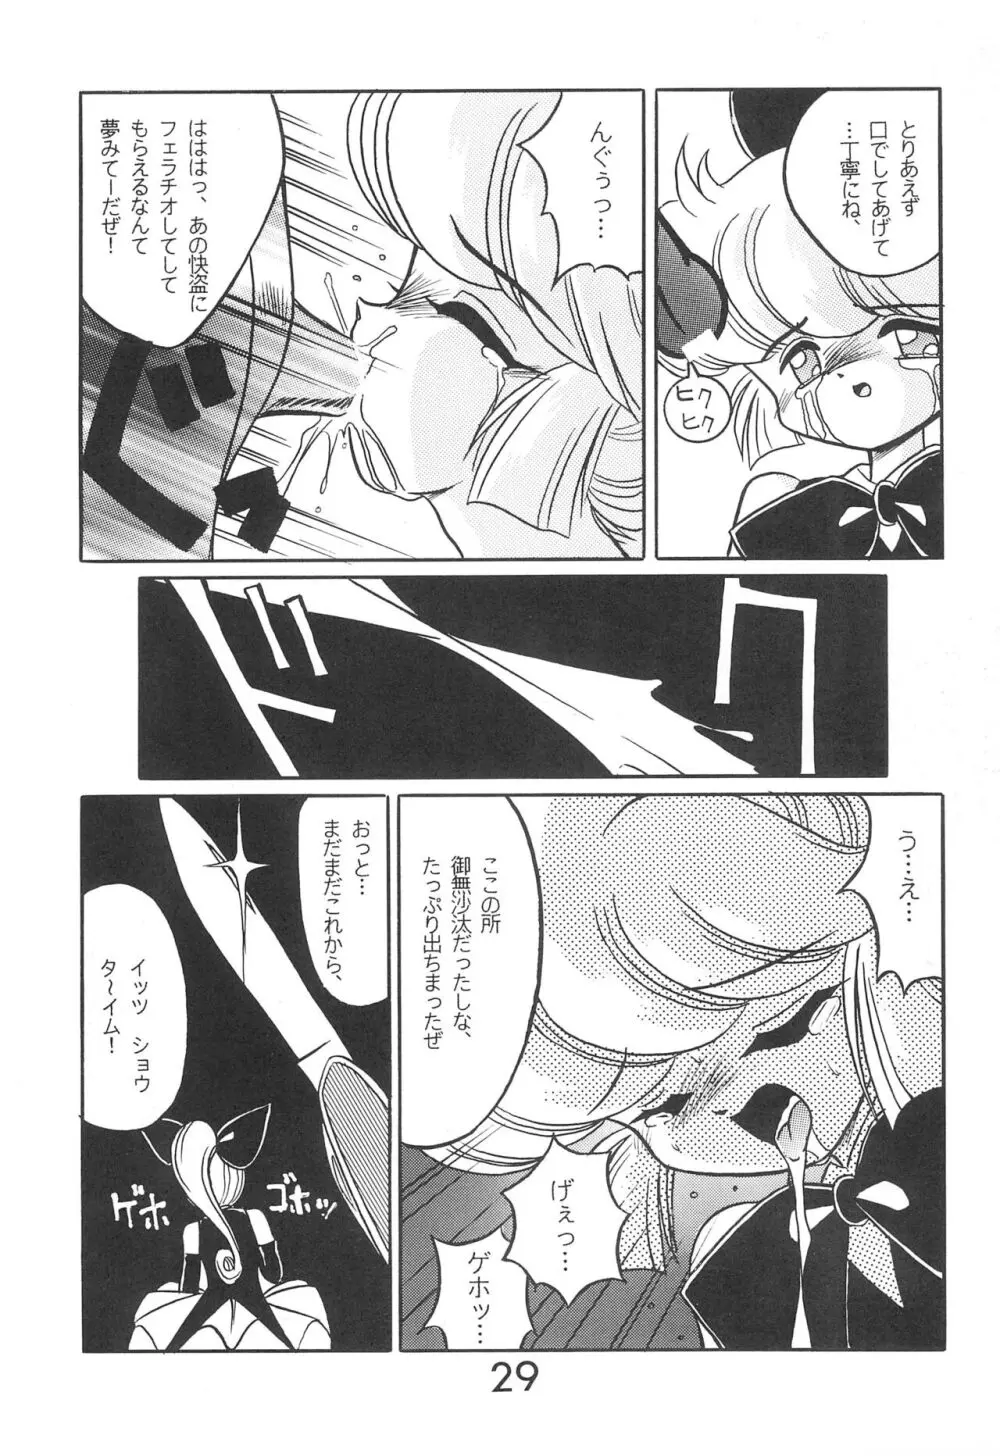 Fun House 9th Chame! - page29